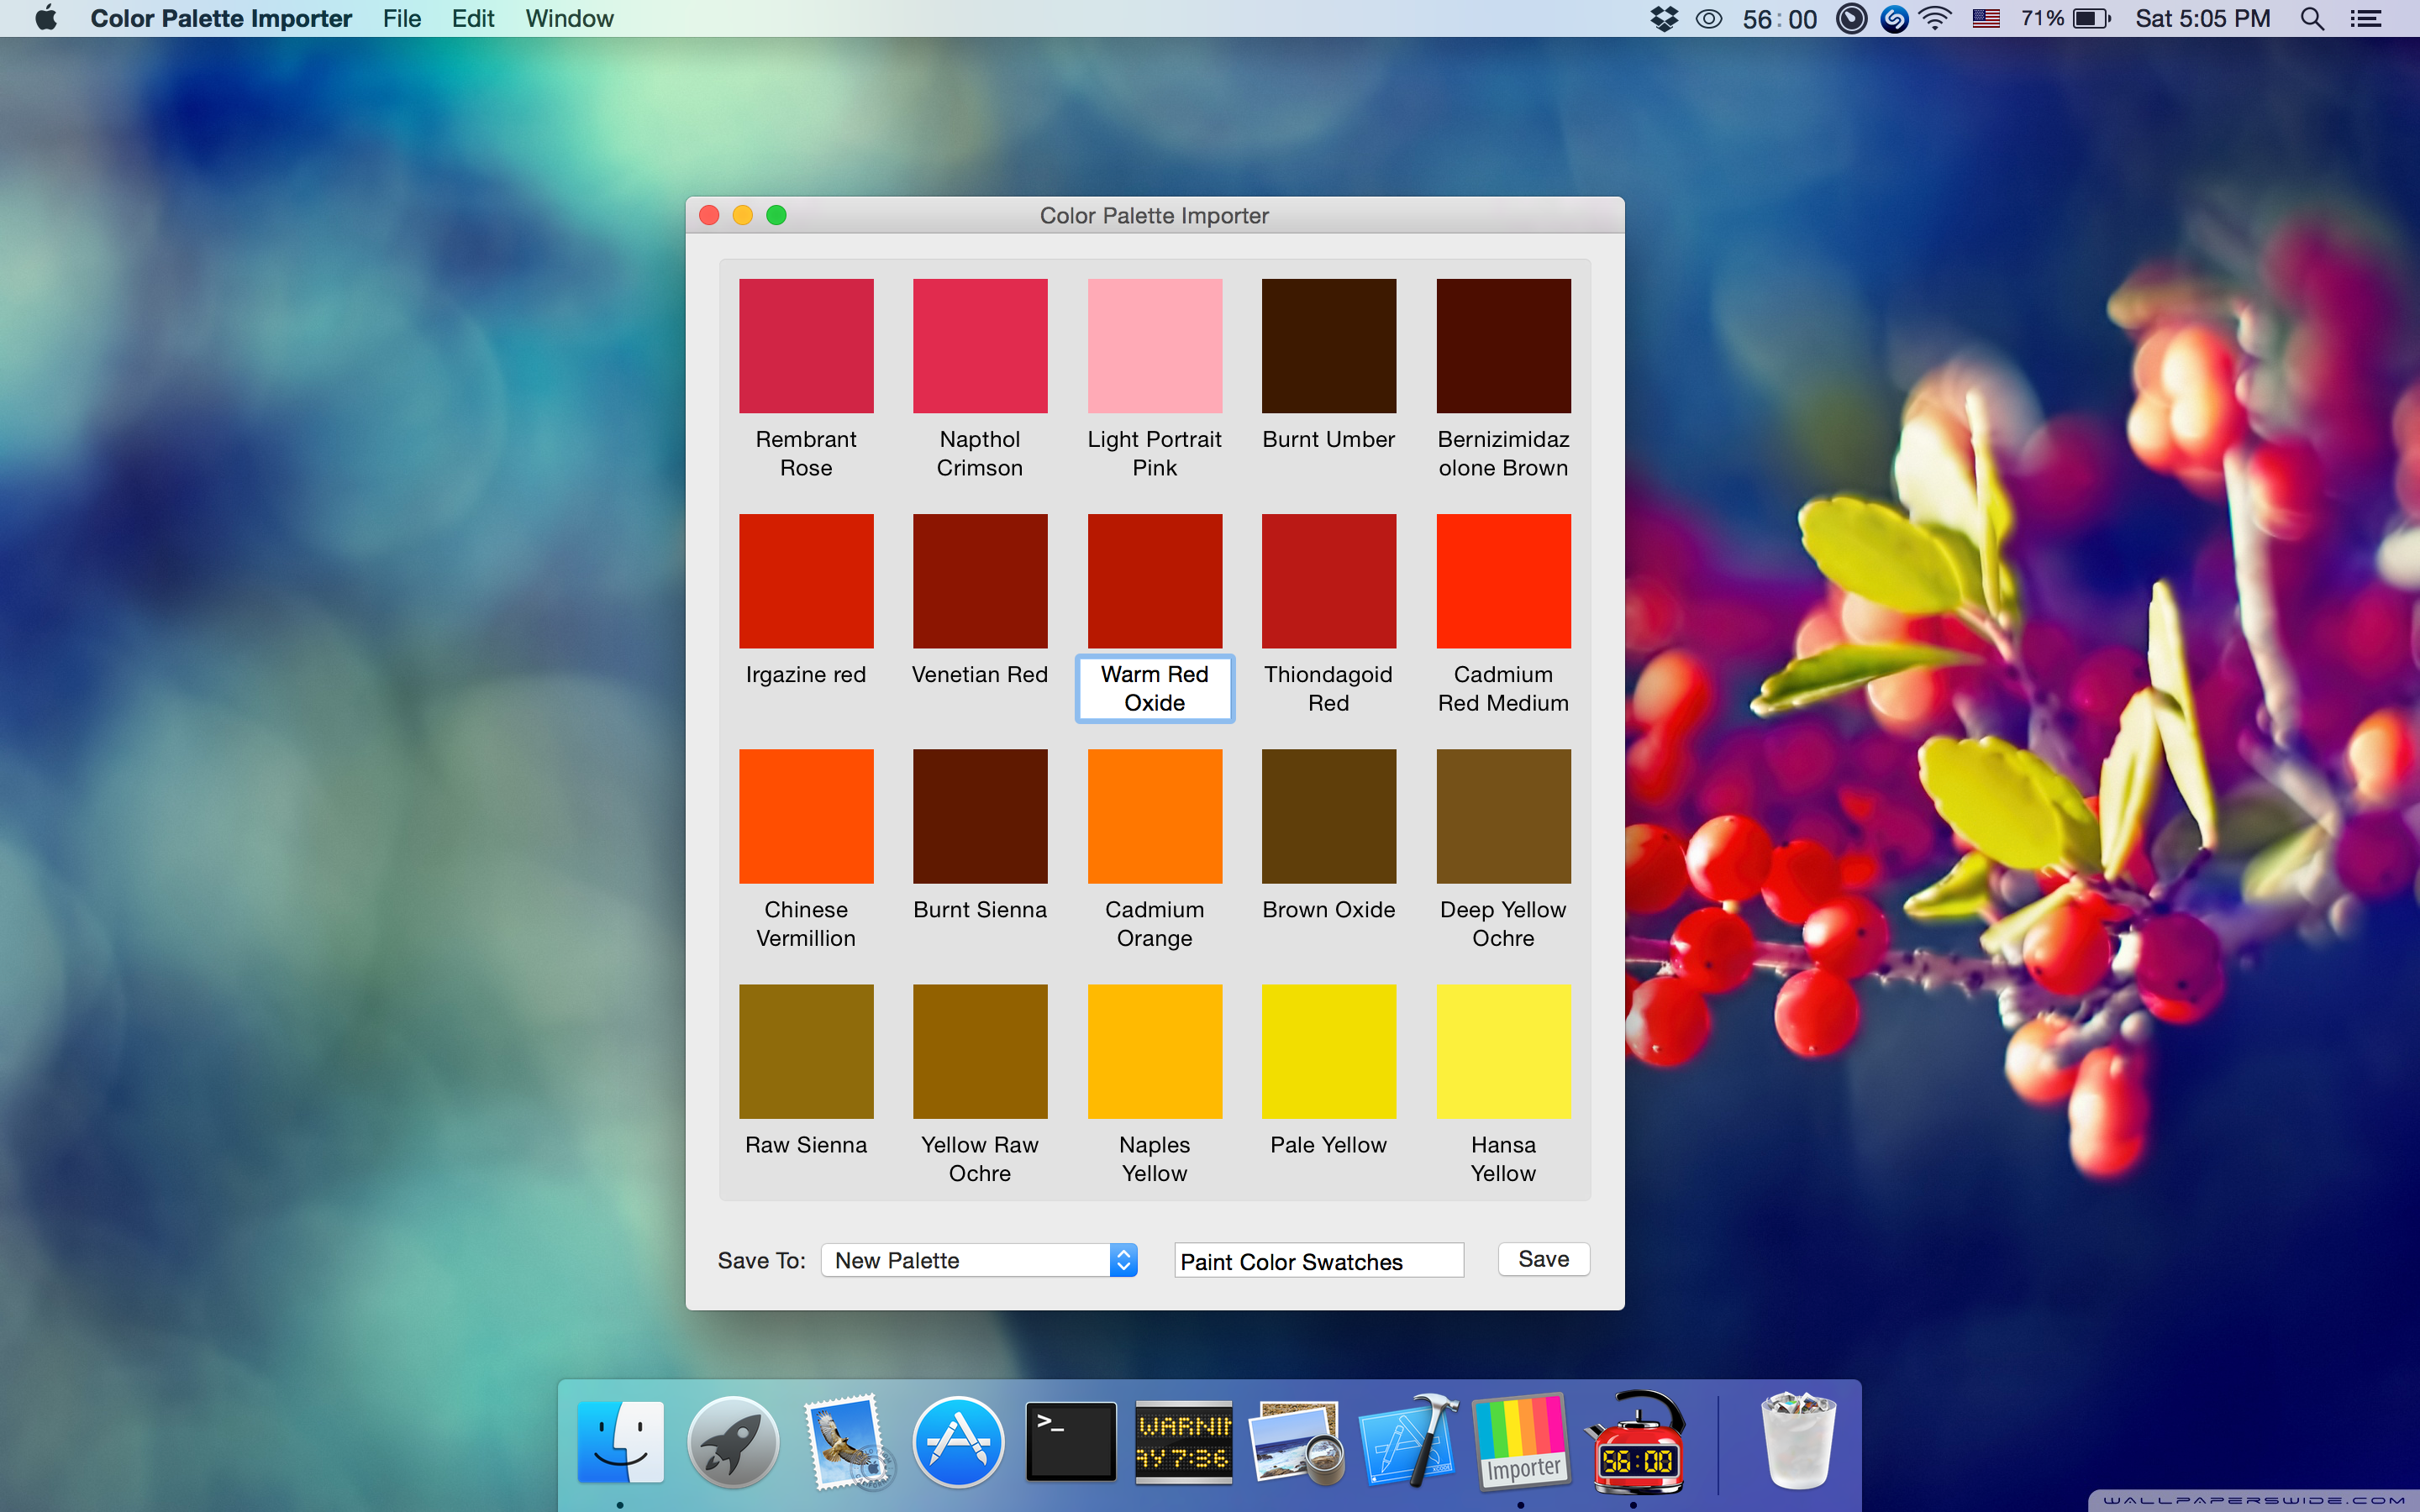 This application will import color swatches